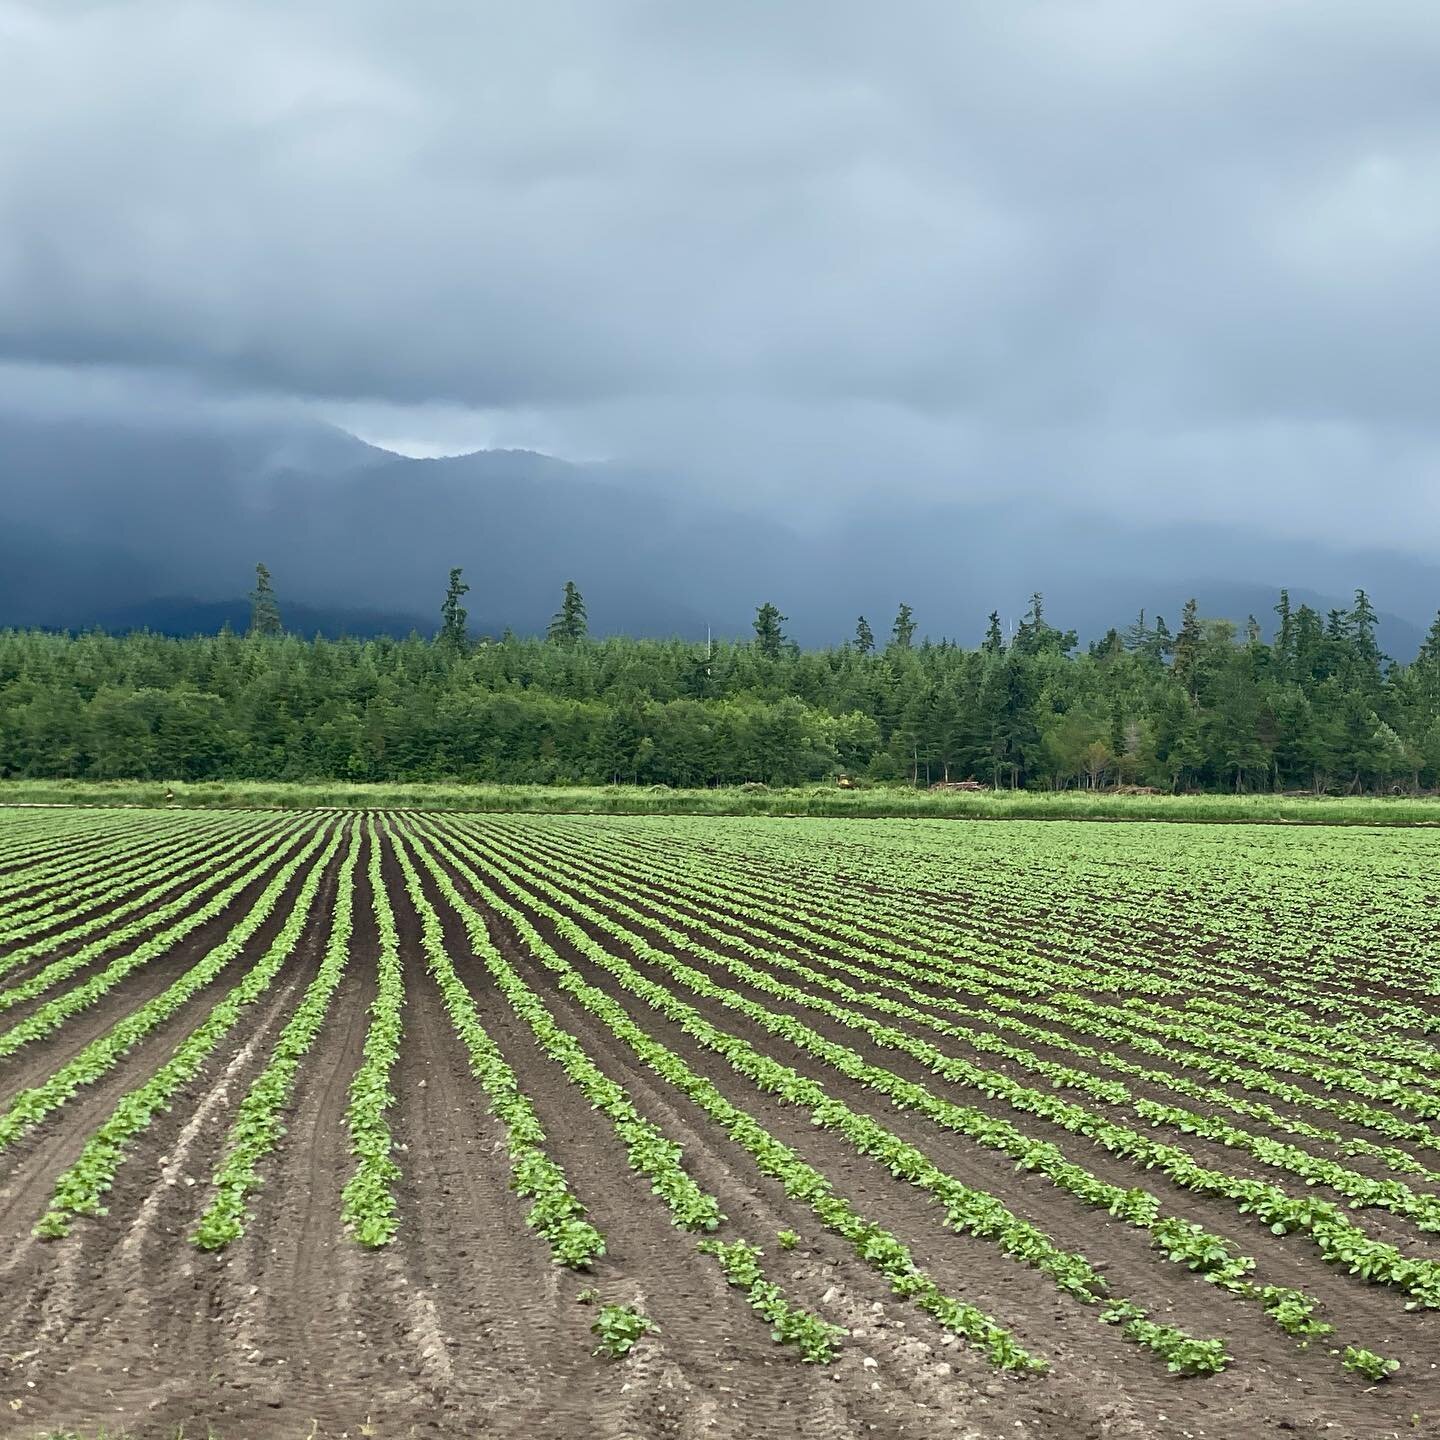 Potatoes!! We have had some pretty great potato growing weather so far and you can see that our crops are happy!! We are thankful for the rain on these beautiful island days. #echovalleyfarmsbc#farming#potatofarming#potatofarm#islandfarm#vancouverisl